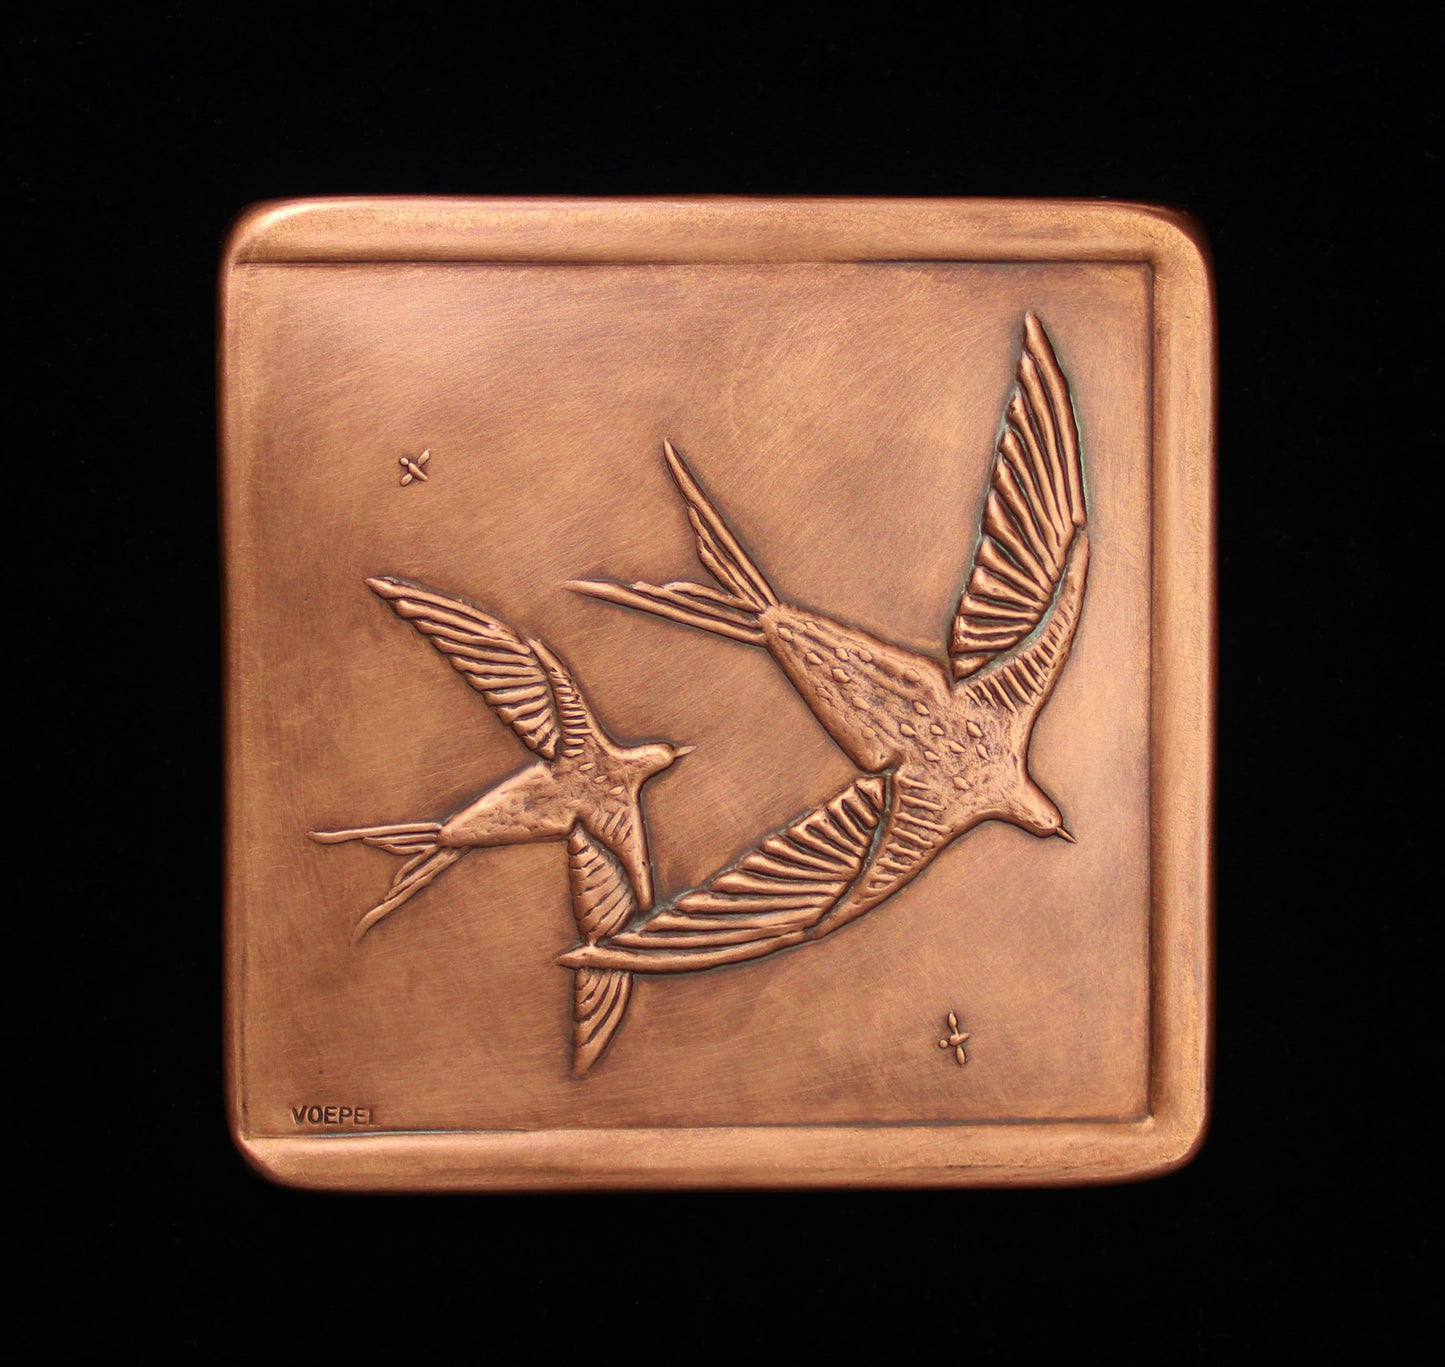 Swallows with Raised Border on Three Sides, 6"x 6" x 1/4", Facing Right